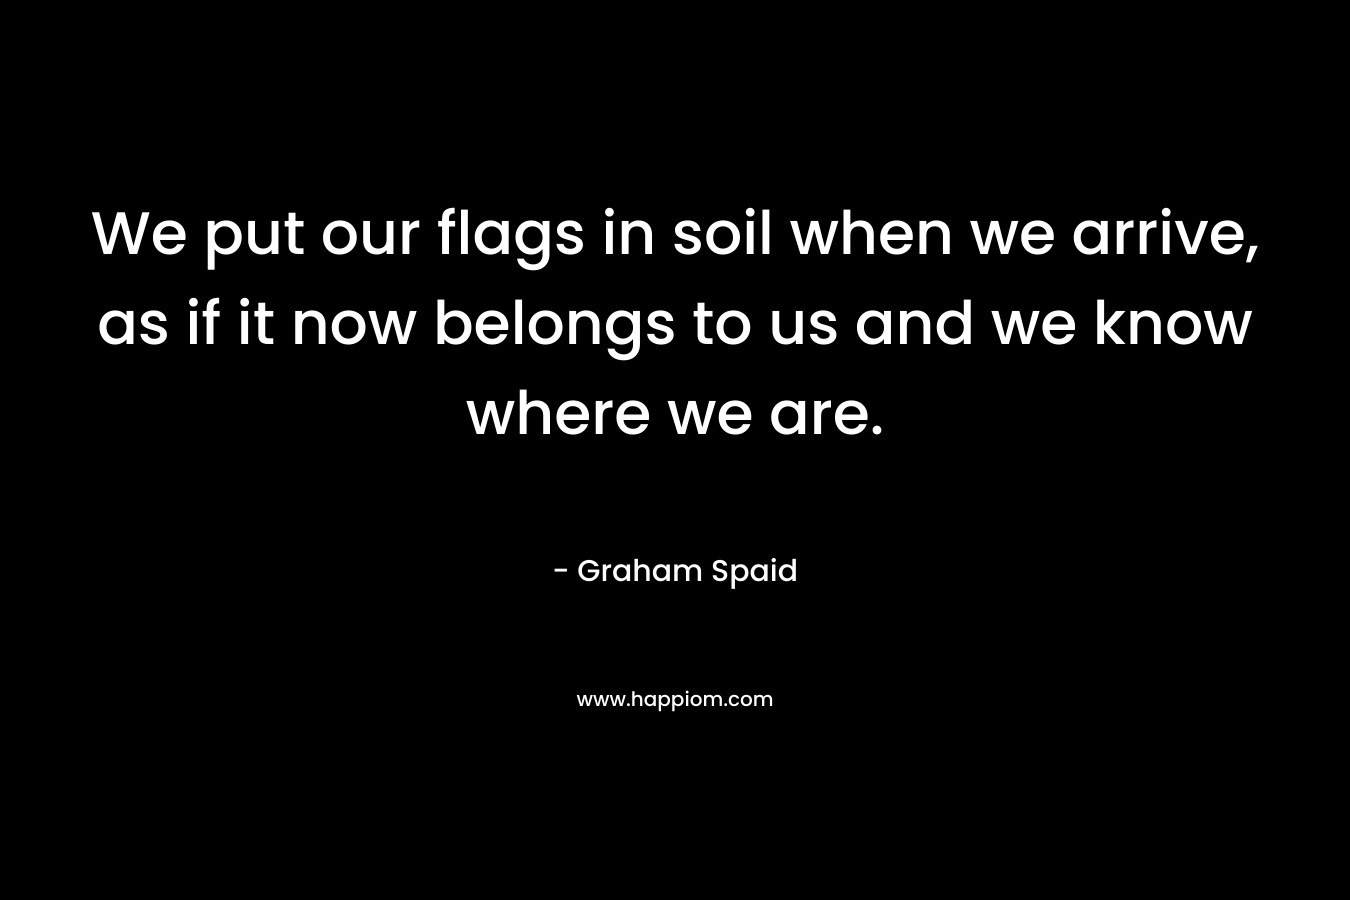 We put our flags in soil when we arrive, as if it now belongs to us and we know where we are. – Graham Spaid